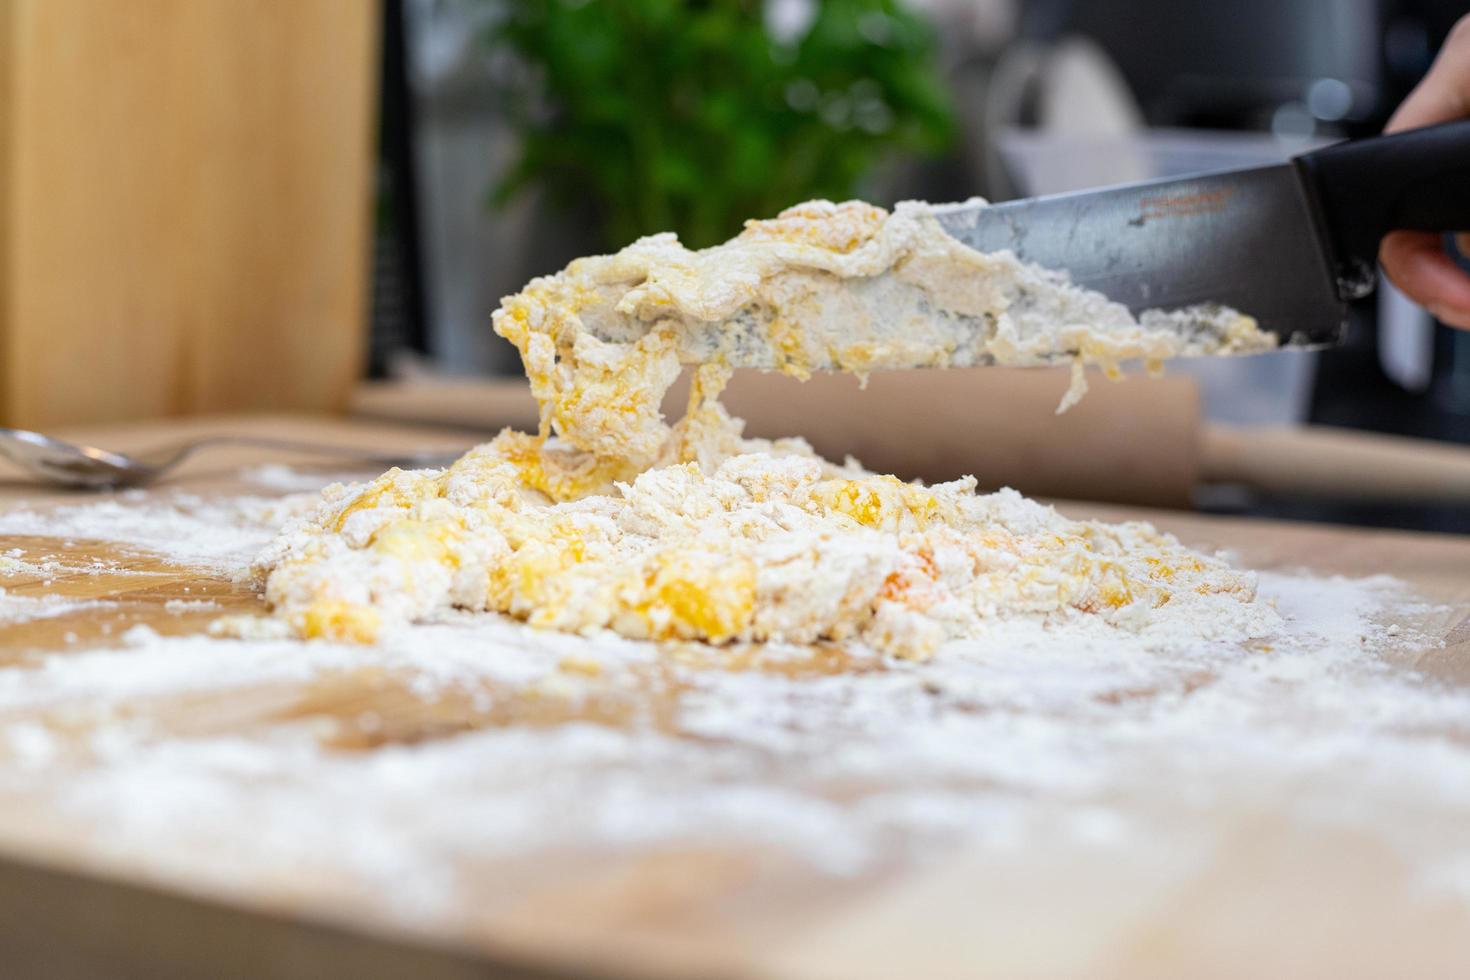 Ingredients for the preparation of homemade pasta. Eggs mixed with flour. photo